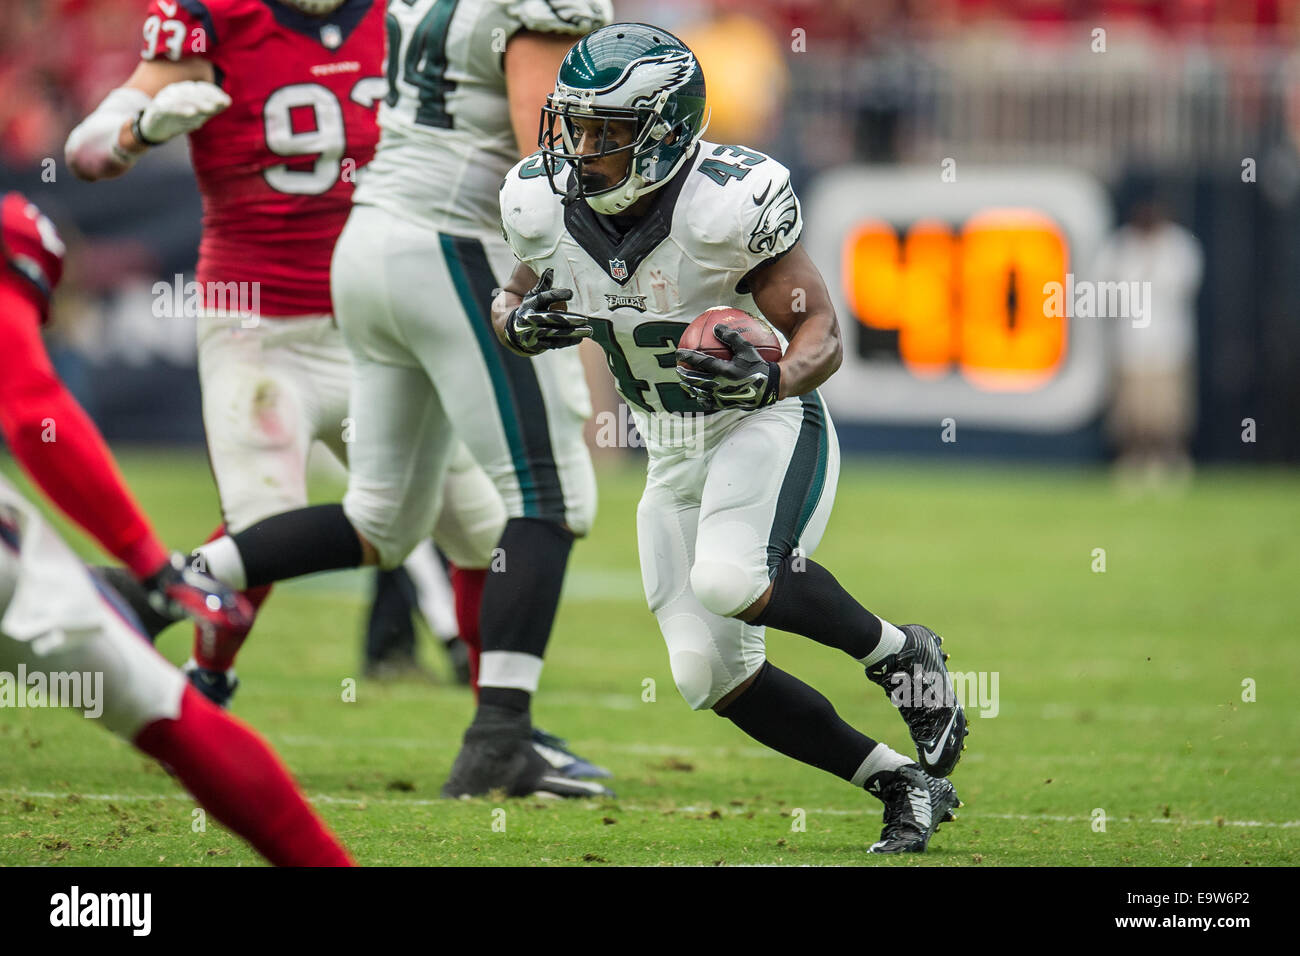 Houston, Texas, USA. 2nd Nov, 2014. Philadelphia Eagles running back Darren Sproles (43) carries the ball during the 1st half of an NFL game between the Houston Texans and the Philadelphia Eagles at NRG Stadium in Houston, TX on November 2nd, 2014. Credit:  Trask Smith/ZUMA Wire/Alamy Live News Stock Photo